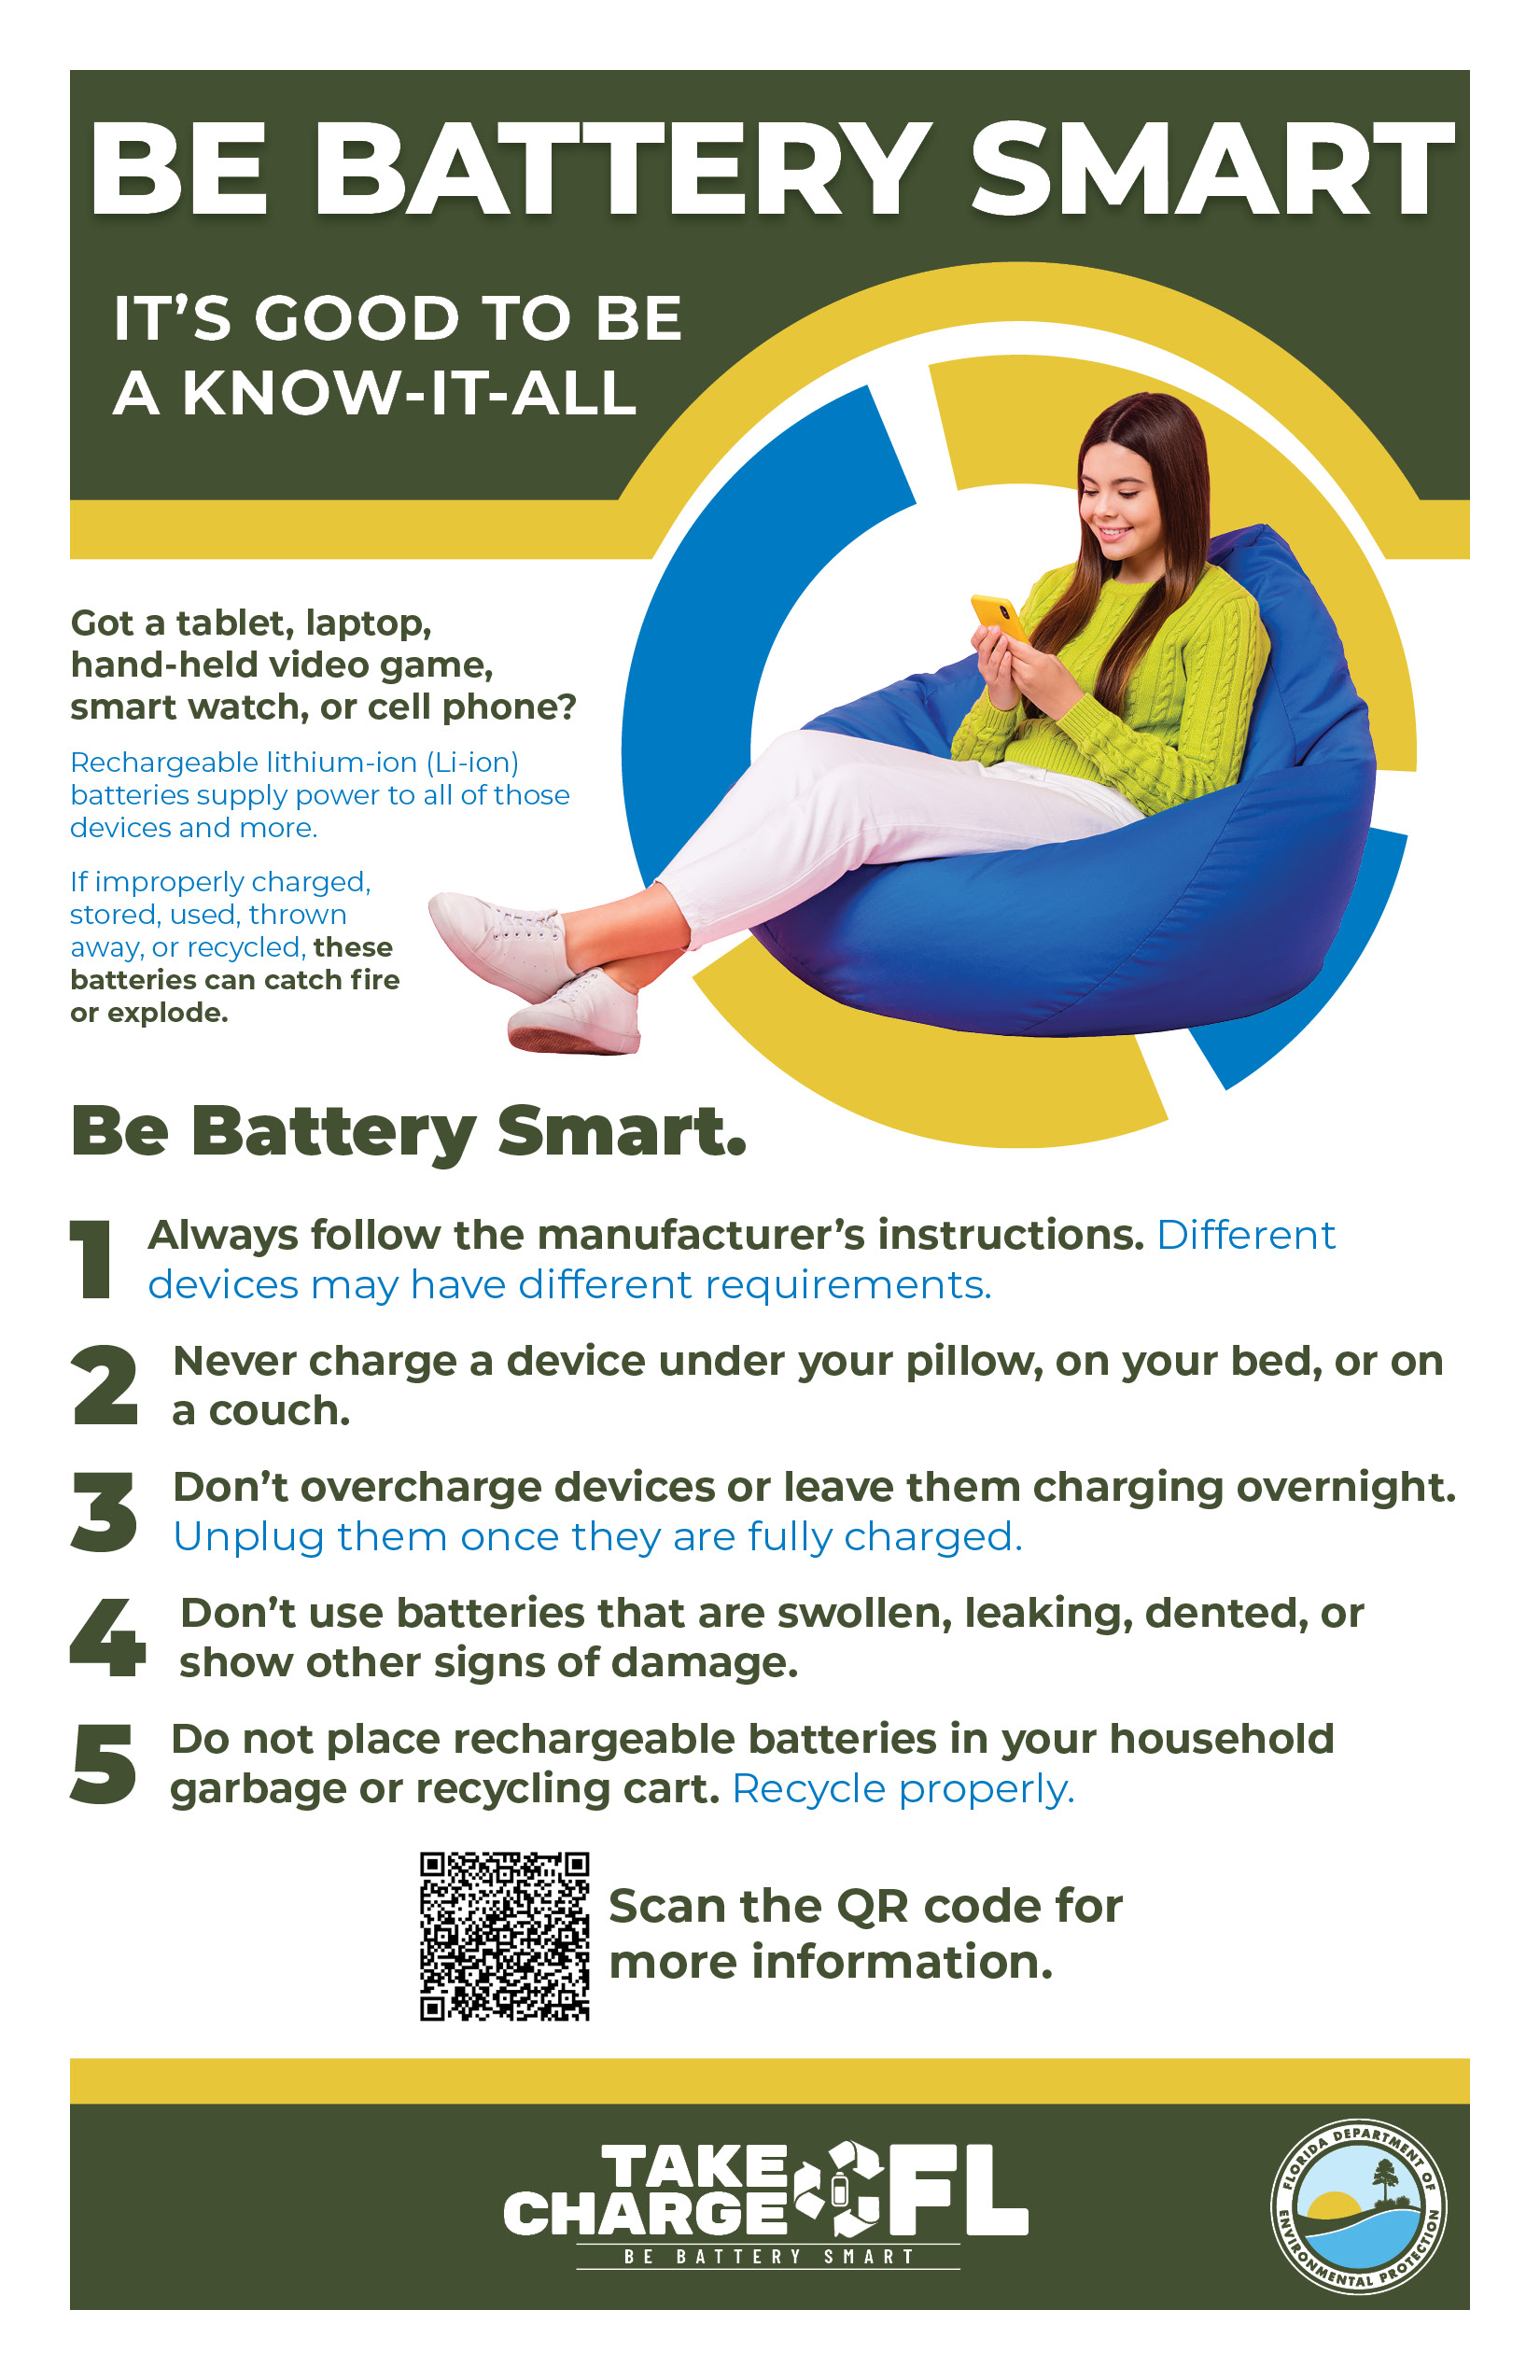 Be Battery Smart. It's good to be a know-it-all.